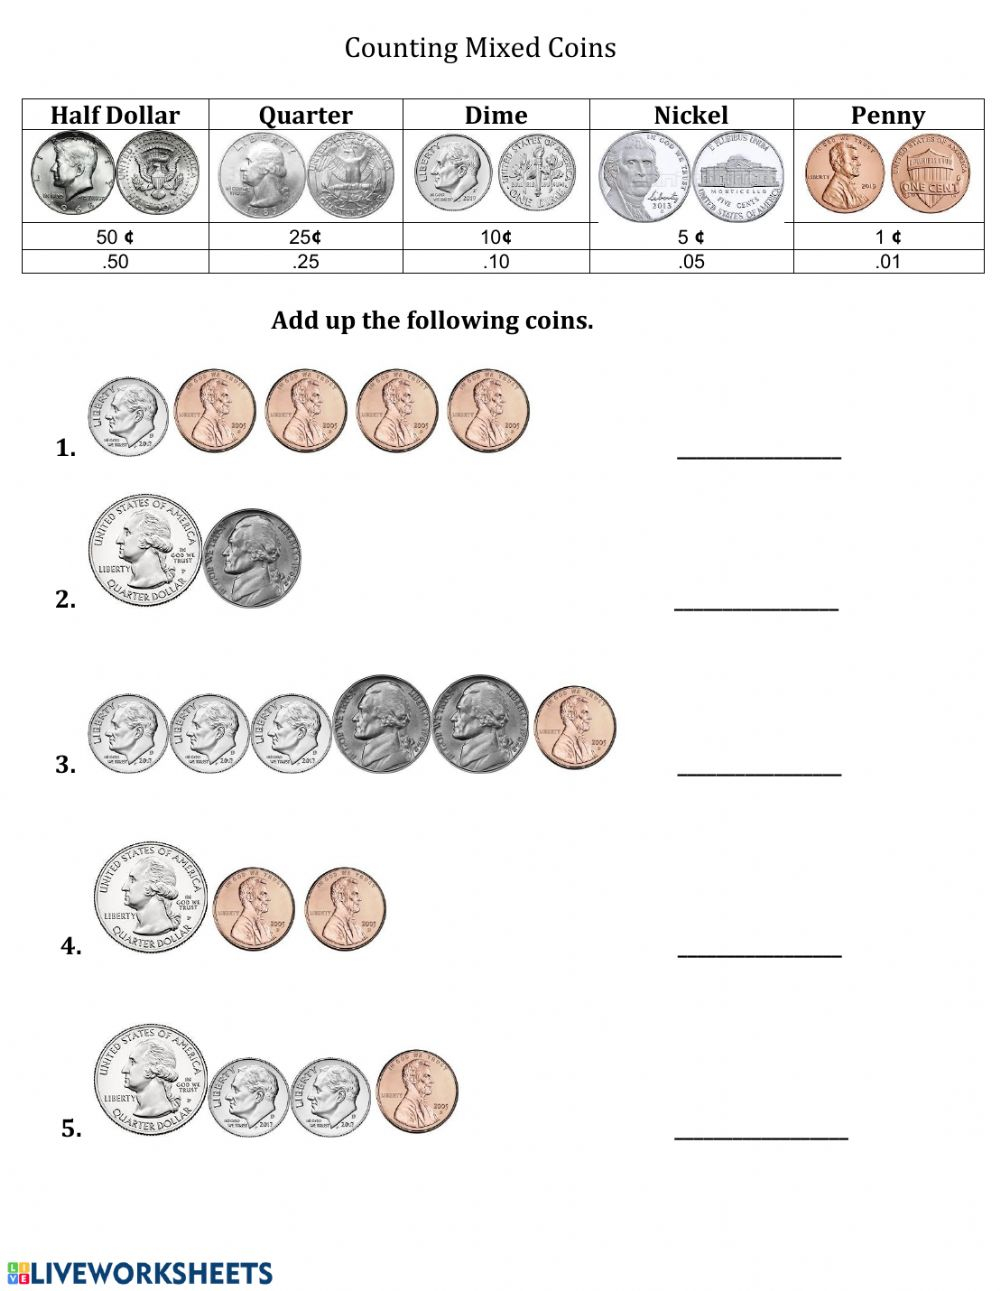 Counting Mixed Coins 1 Worksheet